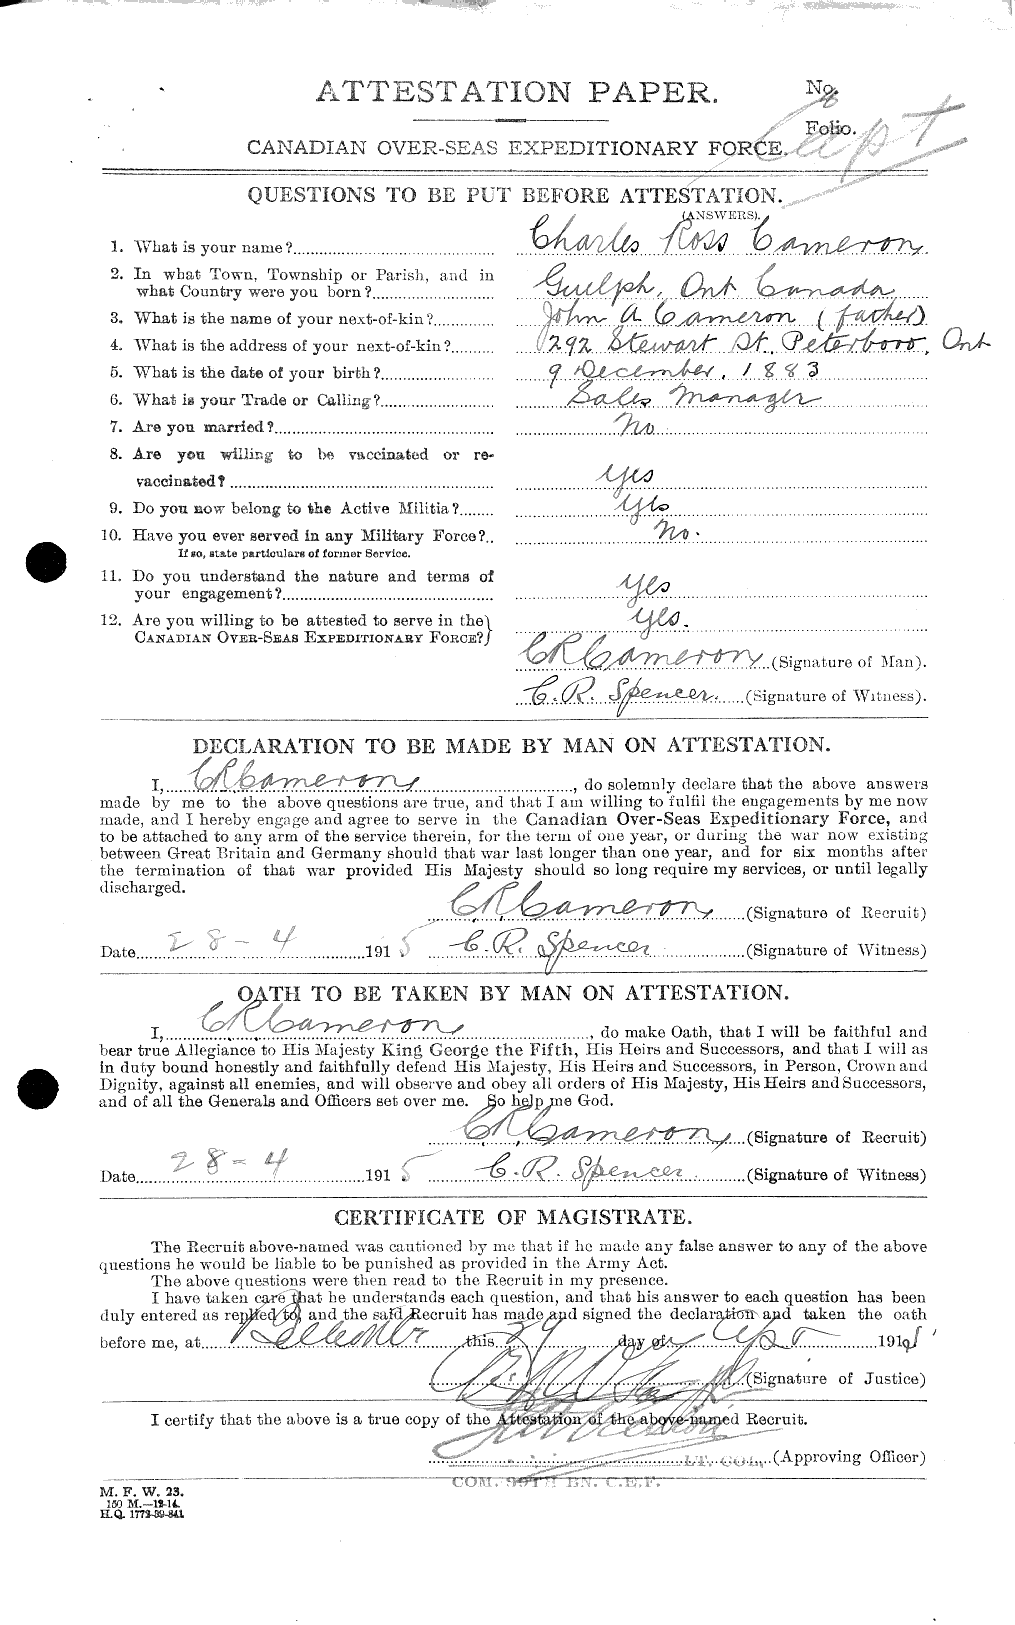 Personnel Records of the First World War - CEF 002620a